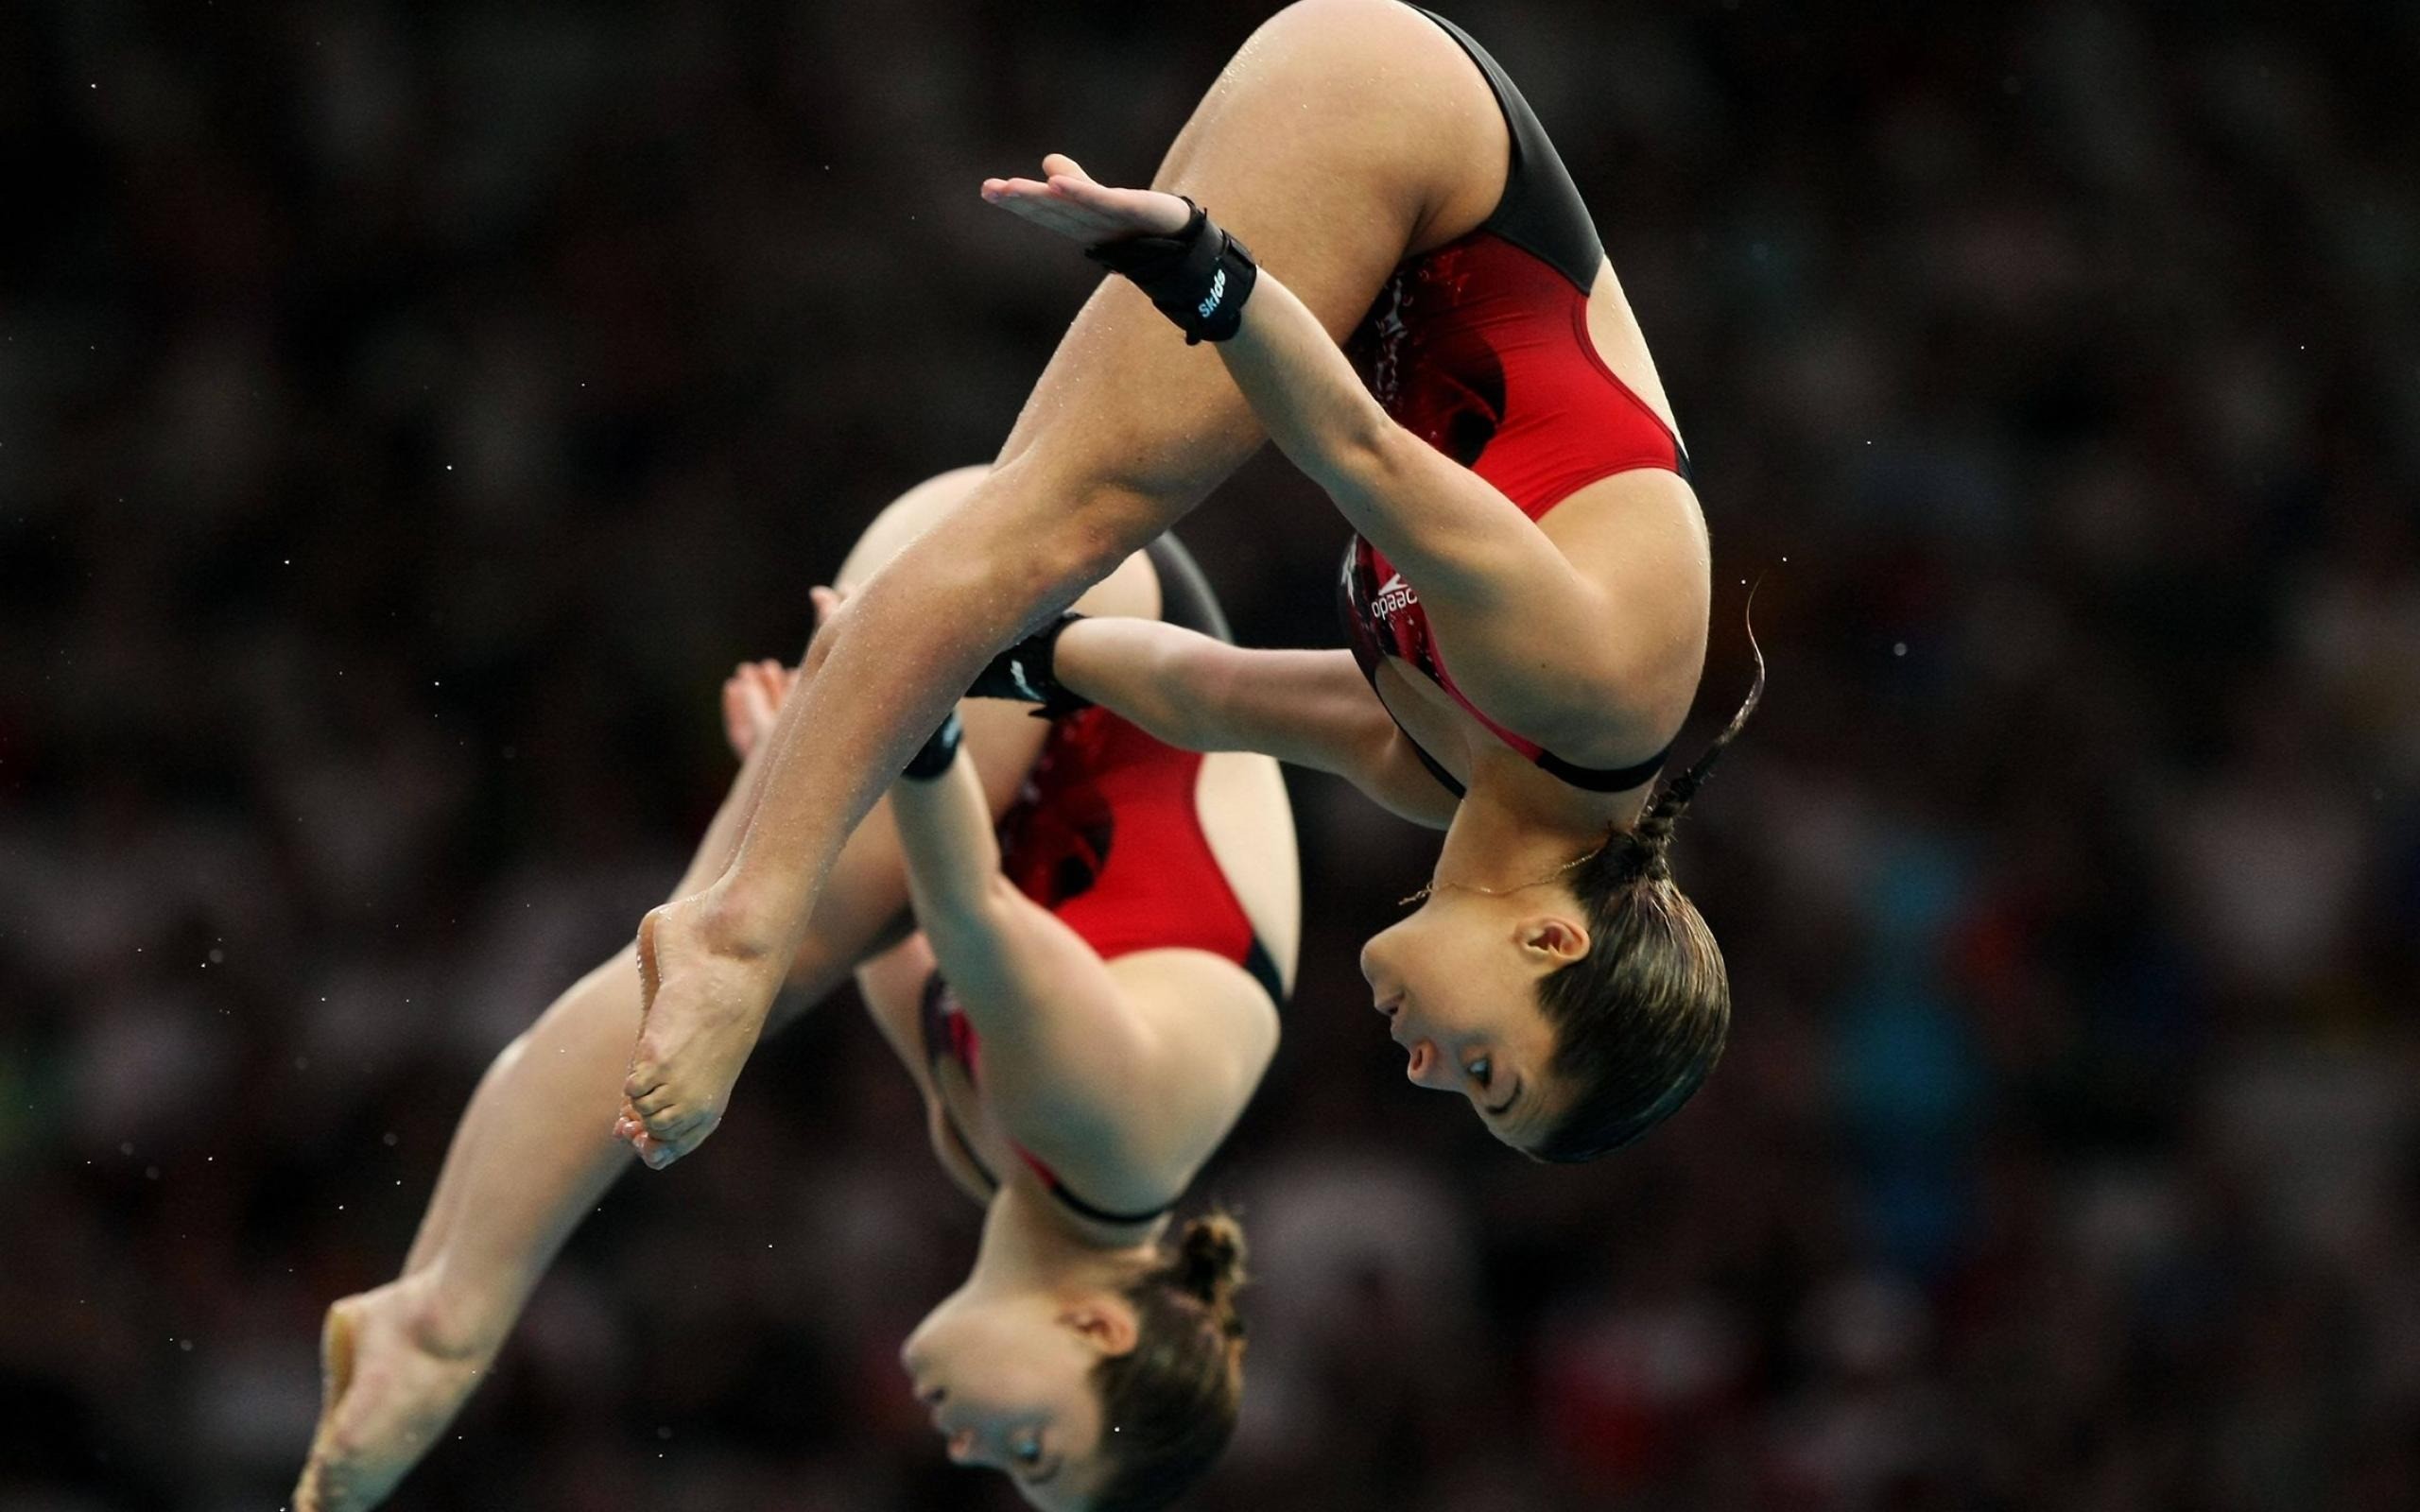 2560x1600 the Olympic diving... pic source .